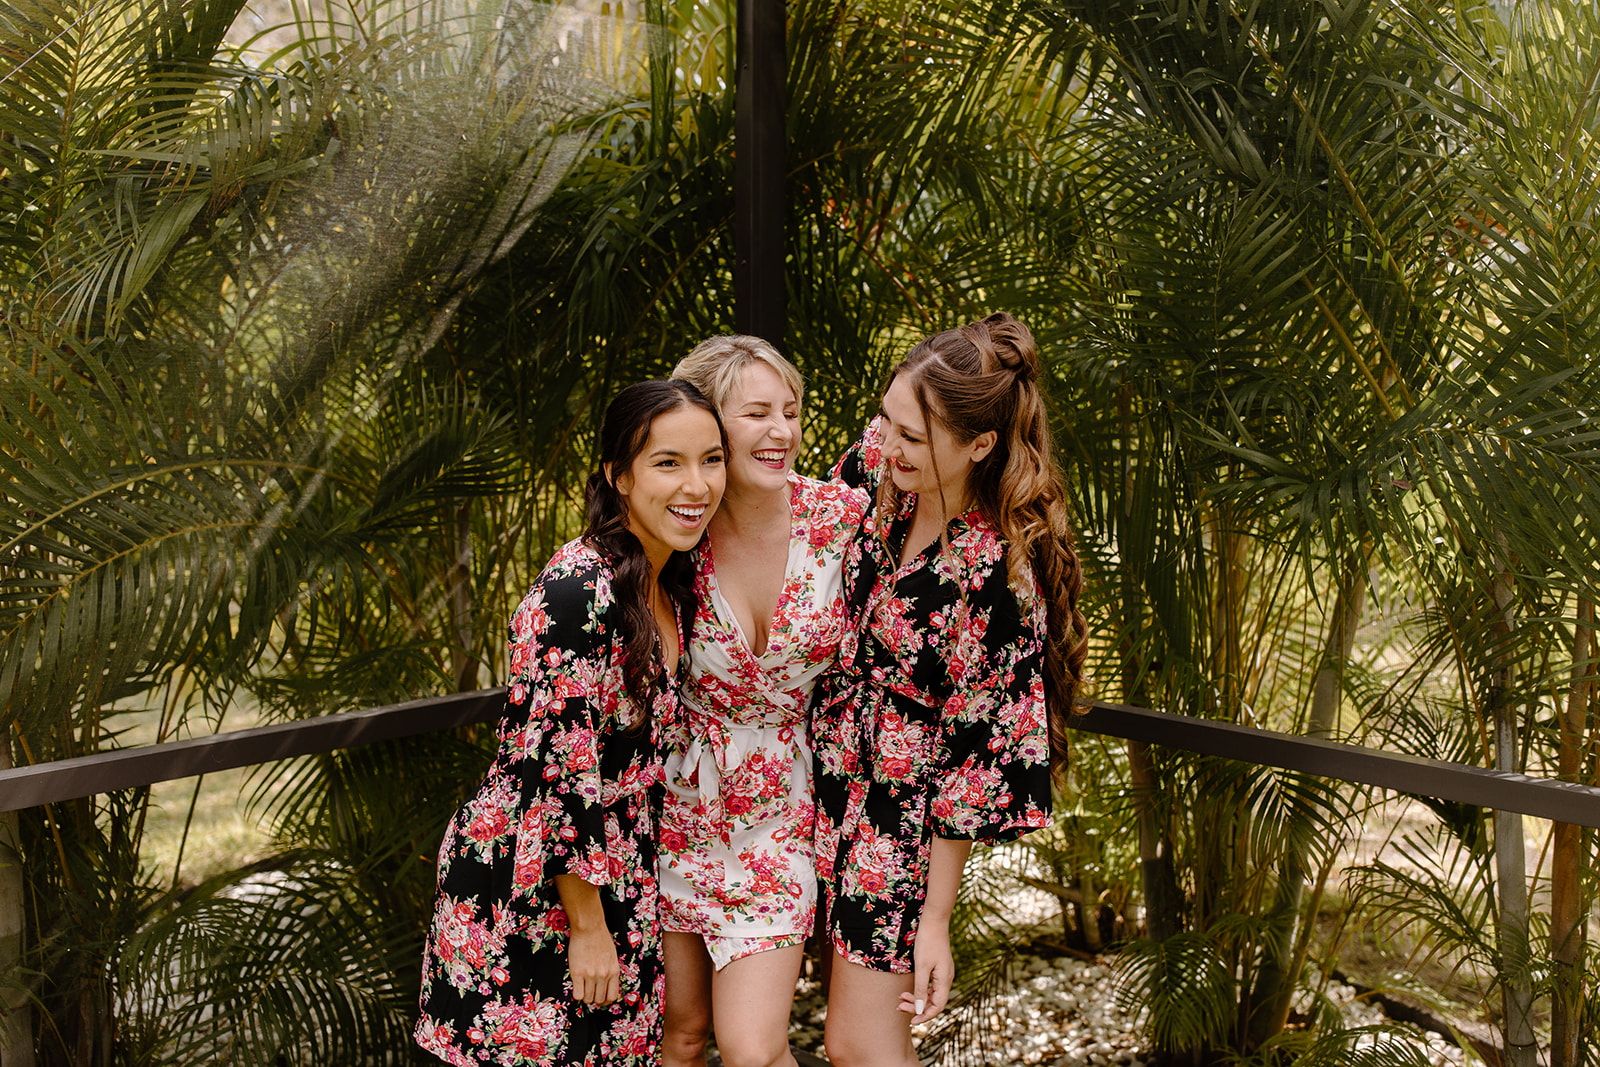 Bride and bridesmaids laughing in their matching floral robes